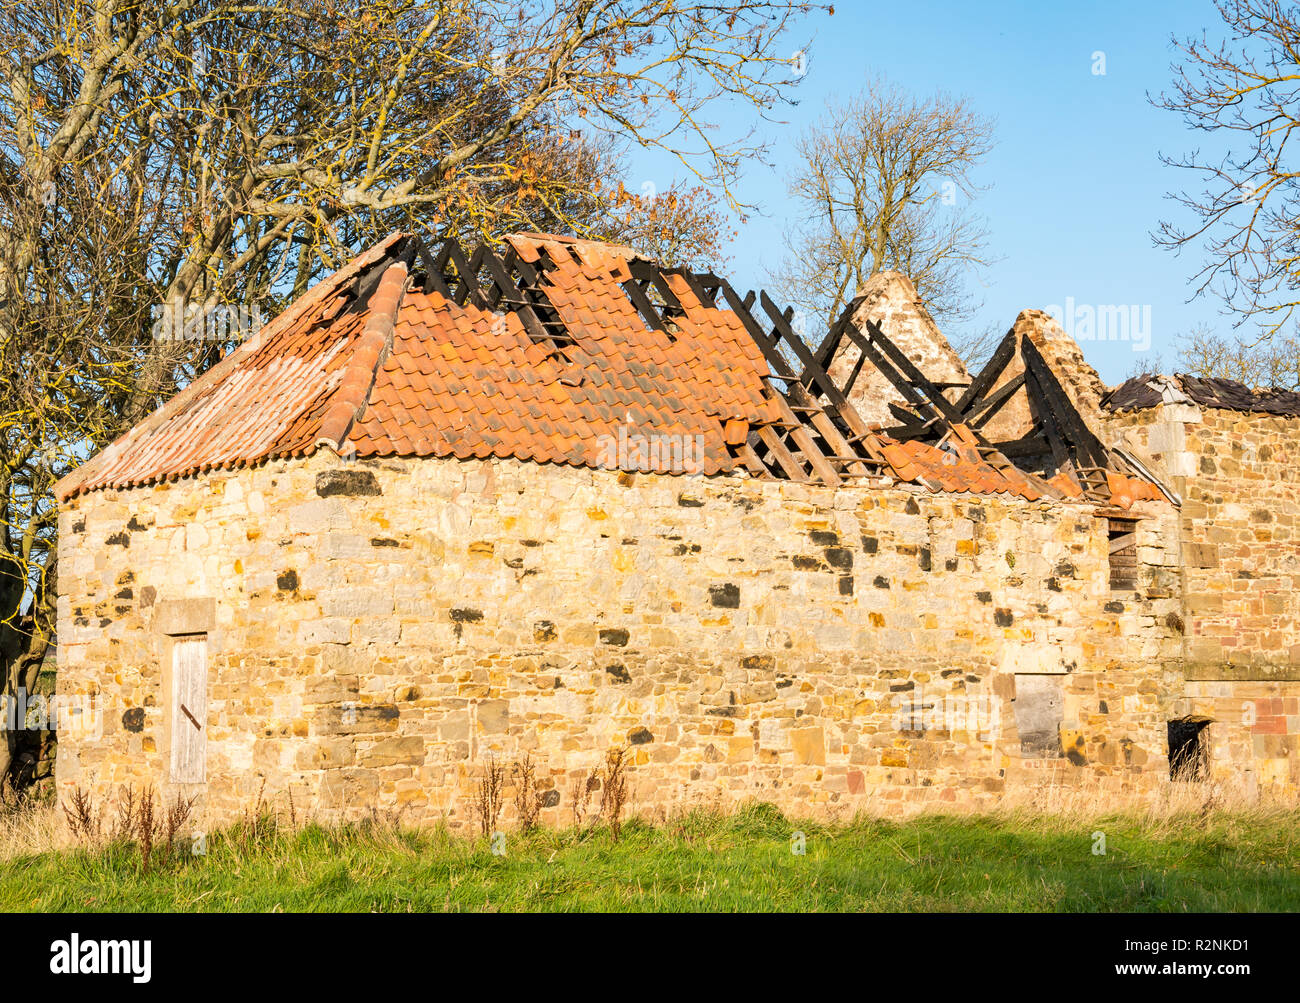 Abandoned stone building in field with collapsed  tiled roof showing fire damage along Tyne River, East Lothian, Scotland, UK Stock Photo